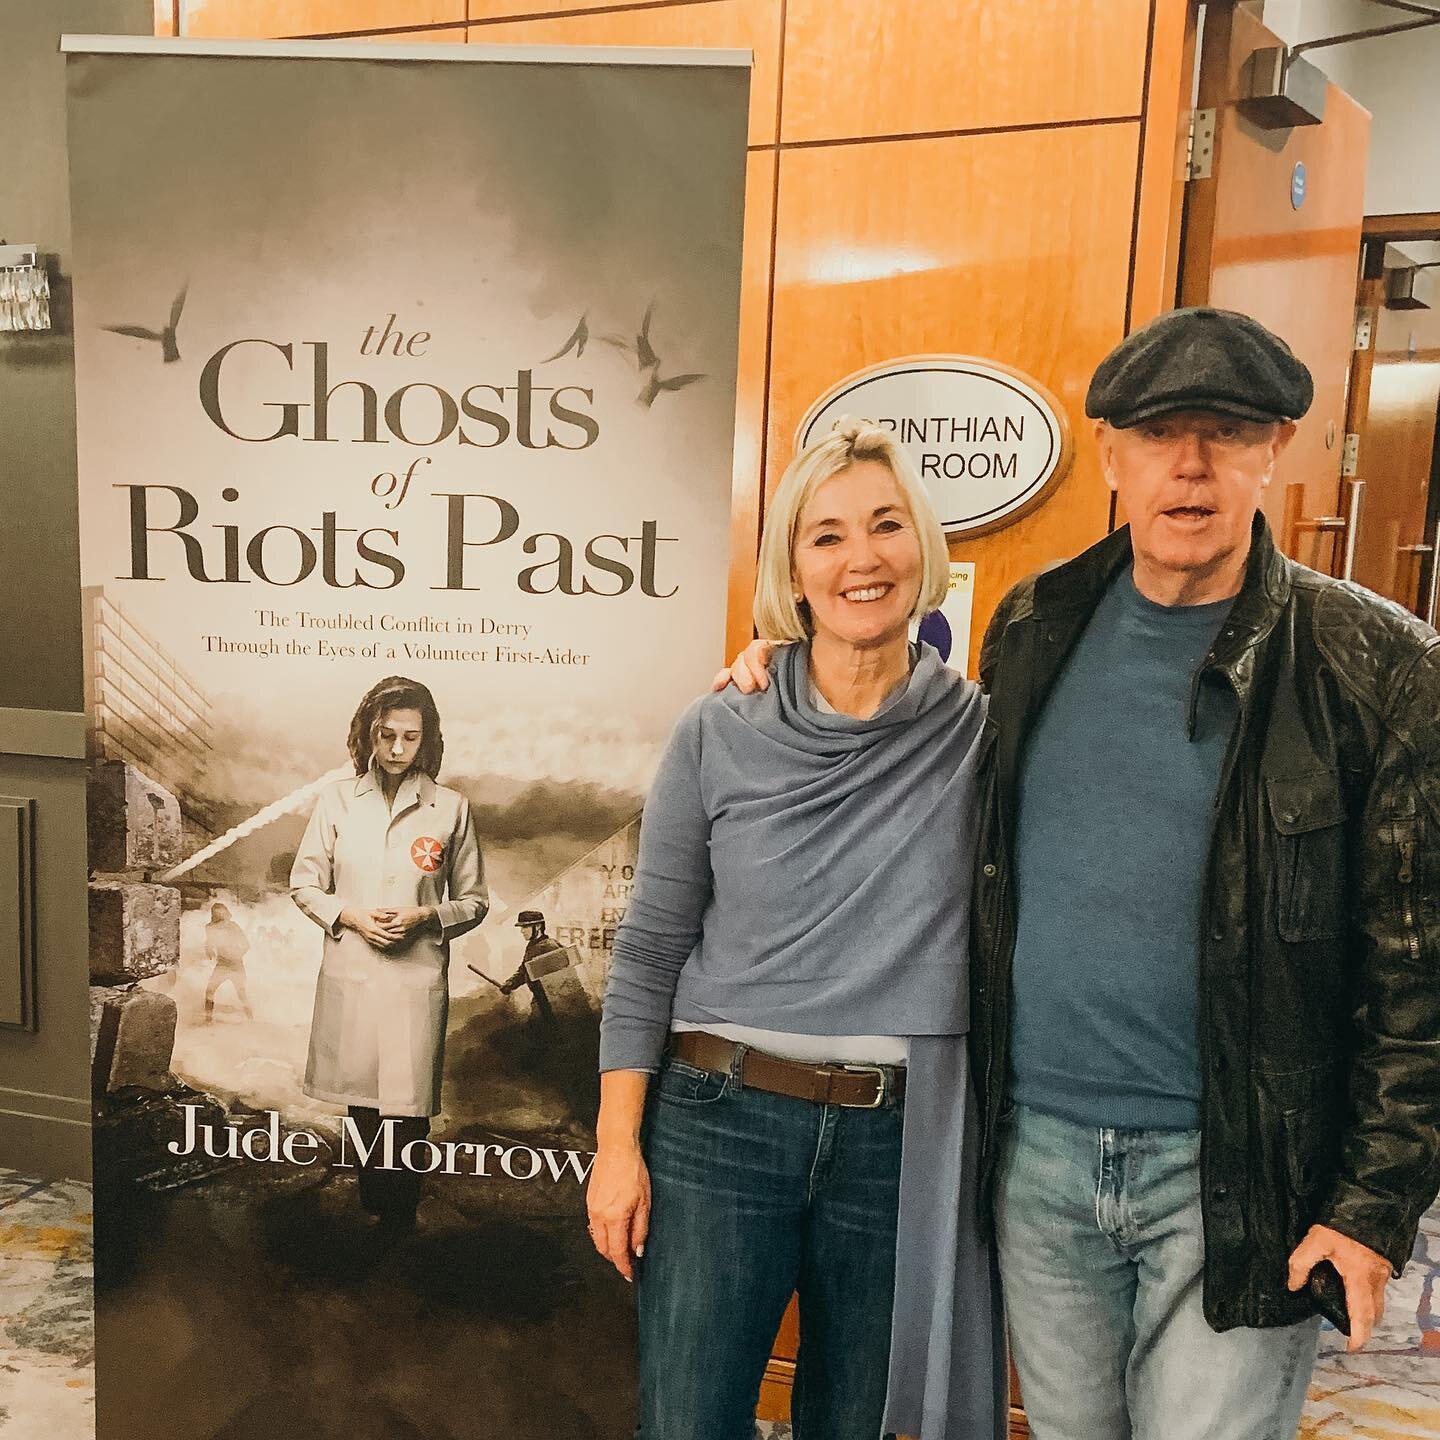 Congratulations to @judemorrow with his launch last night 🥂 Can&rsquo;t wait to dive into this book!

#derry #londonderry #derrycity #cityofderry #derrygirl #thetroubles #irishauthors #selfpublish #selfpublishingauthor #indieauthorsinstagram #indieb